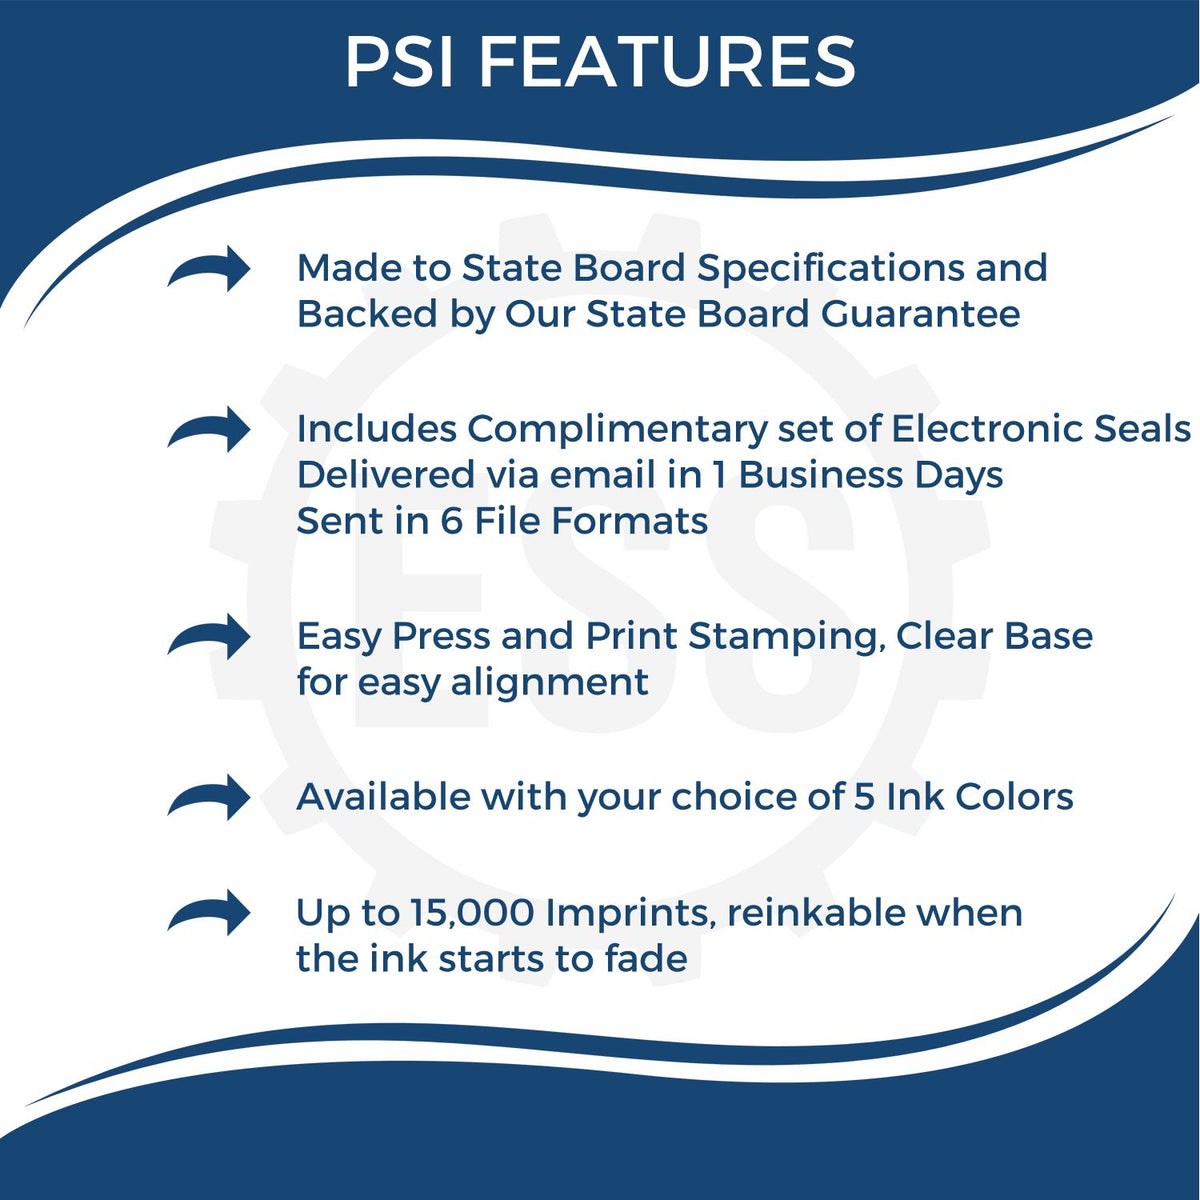 A picture of an infographic highlighting the selling points for the PSI Massachusetts Notary Stamp